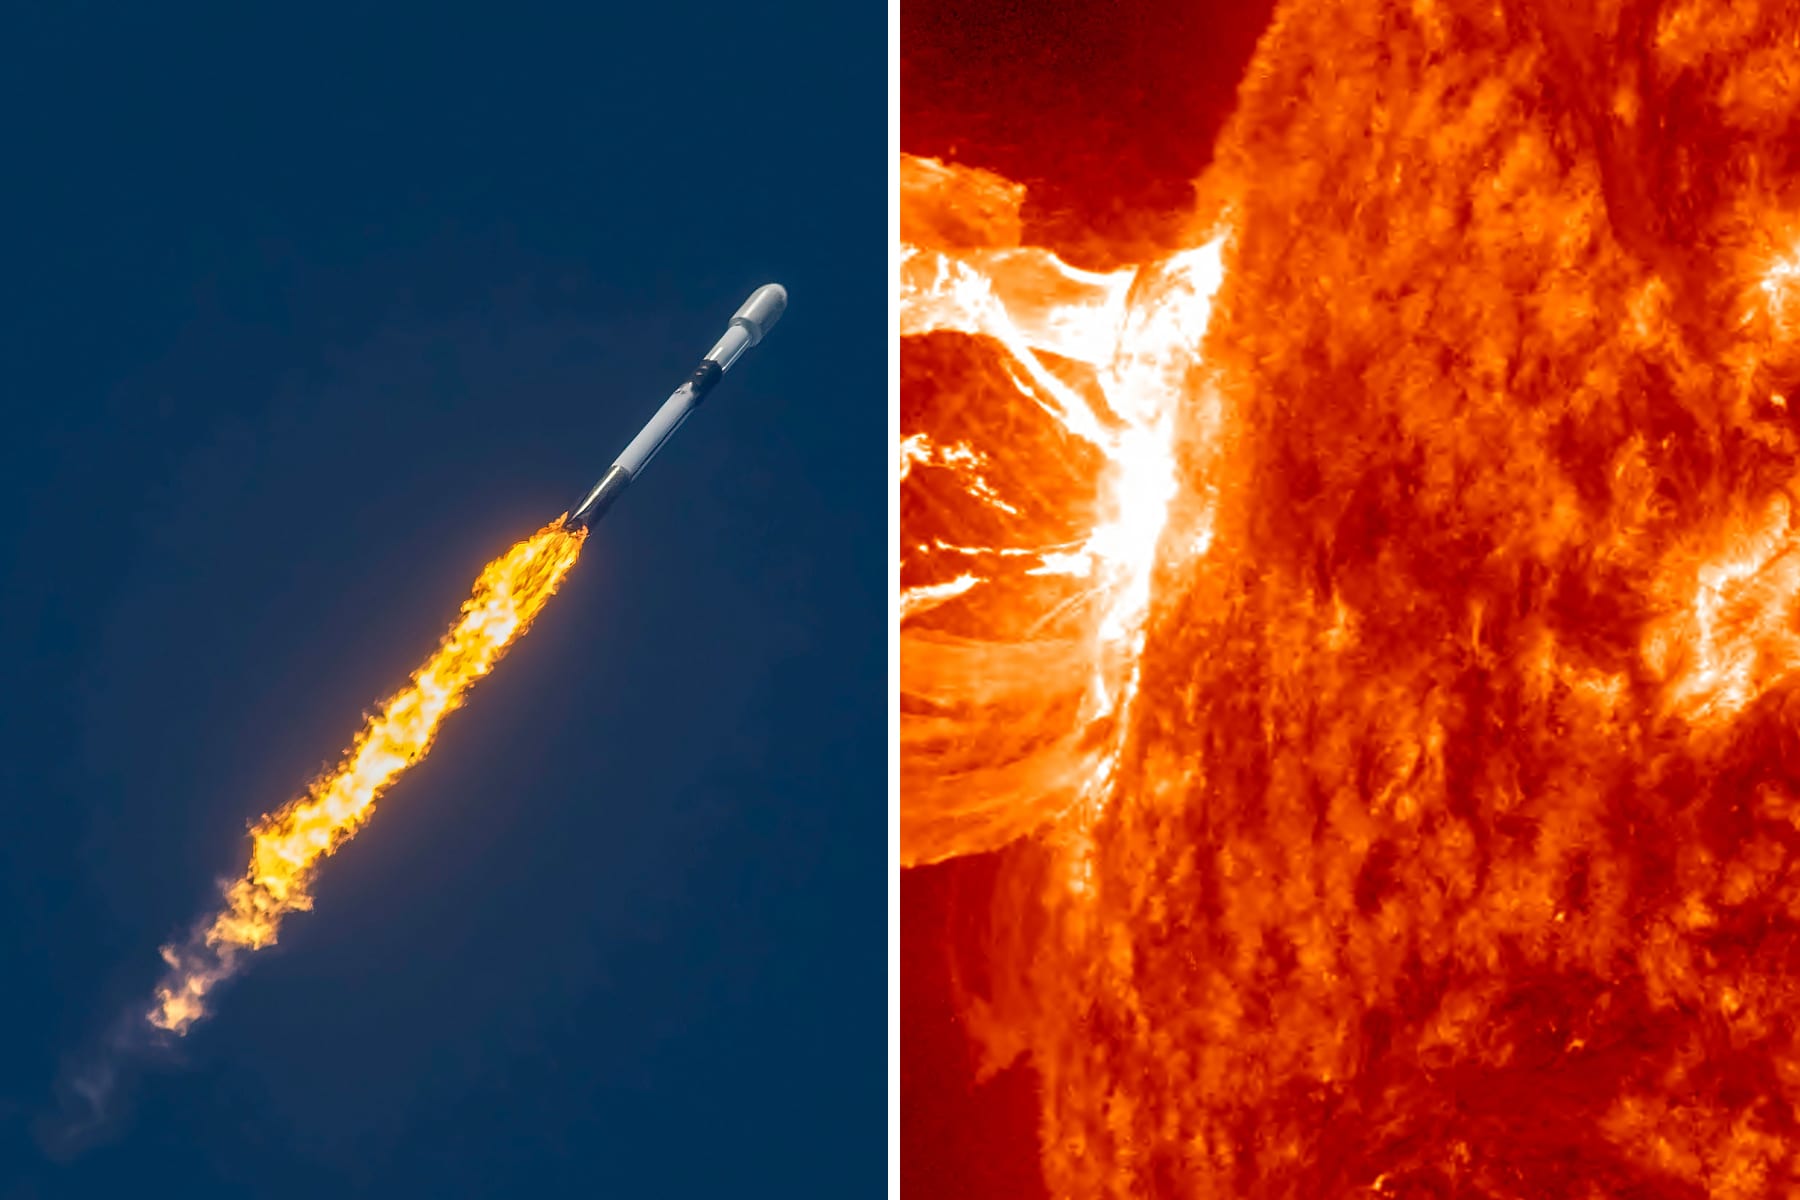 Why solar geomagnetic storms destroy satellites like SpaceX Starlink